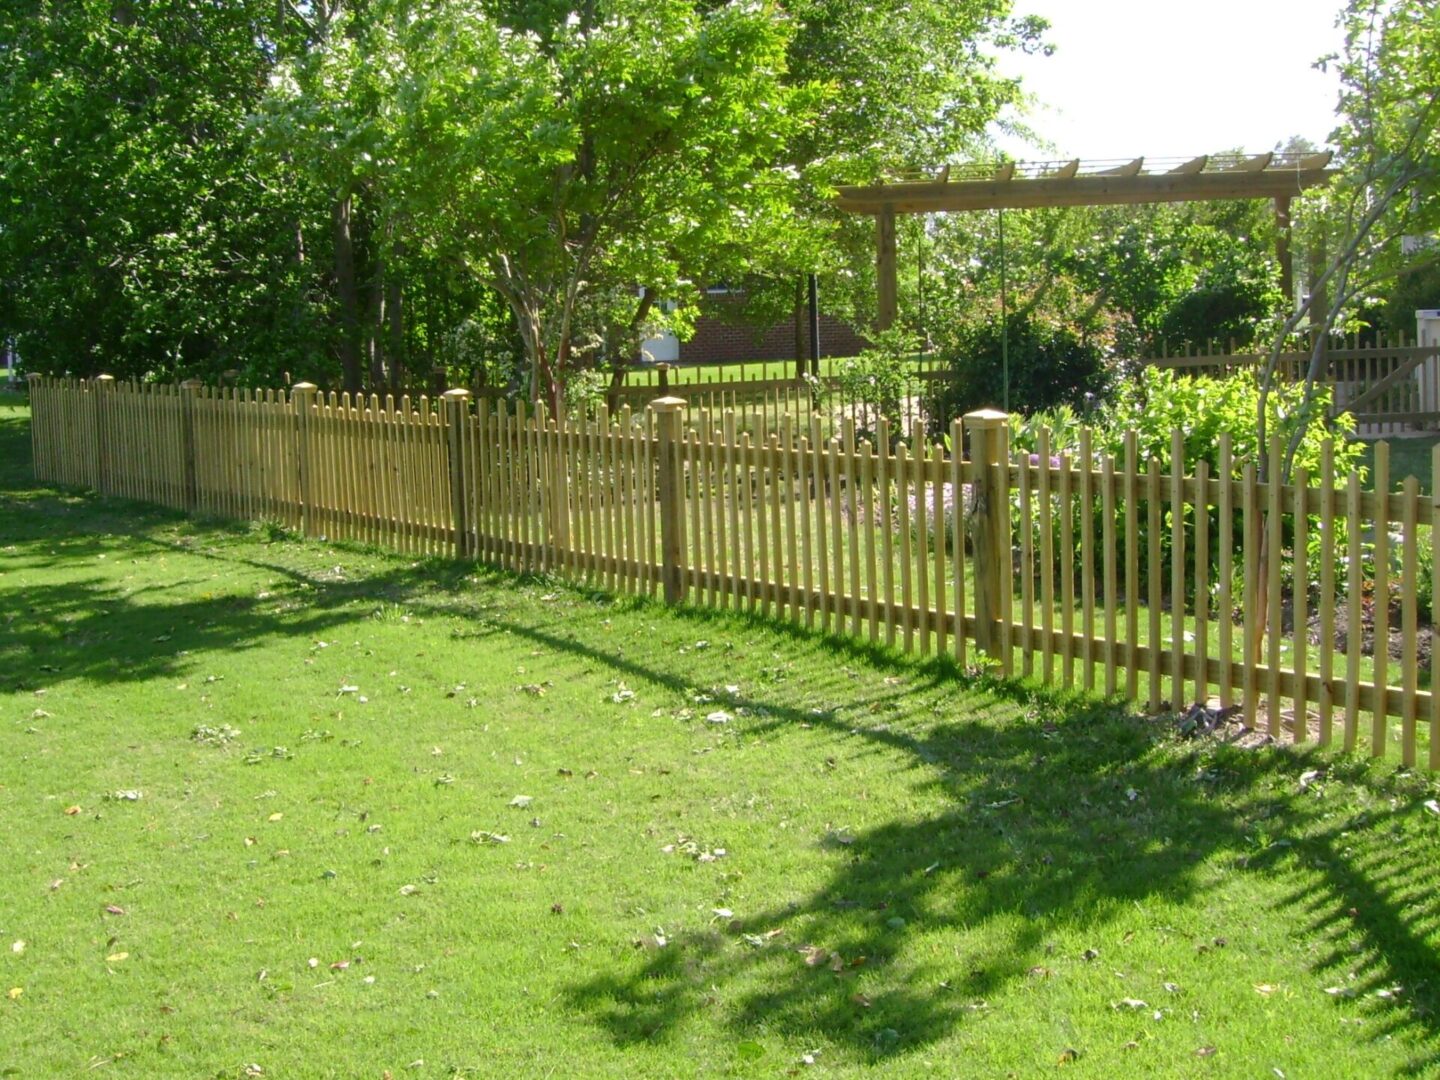 A wooden fence in the middle of a yard.